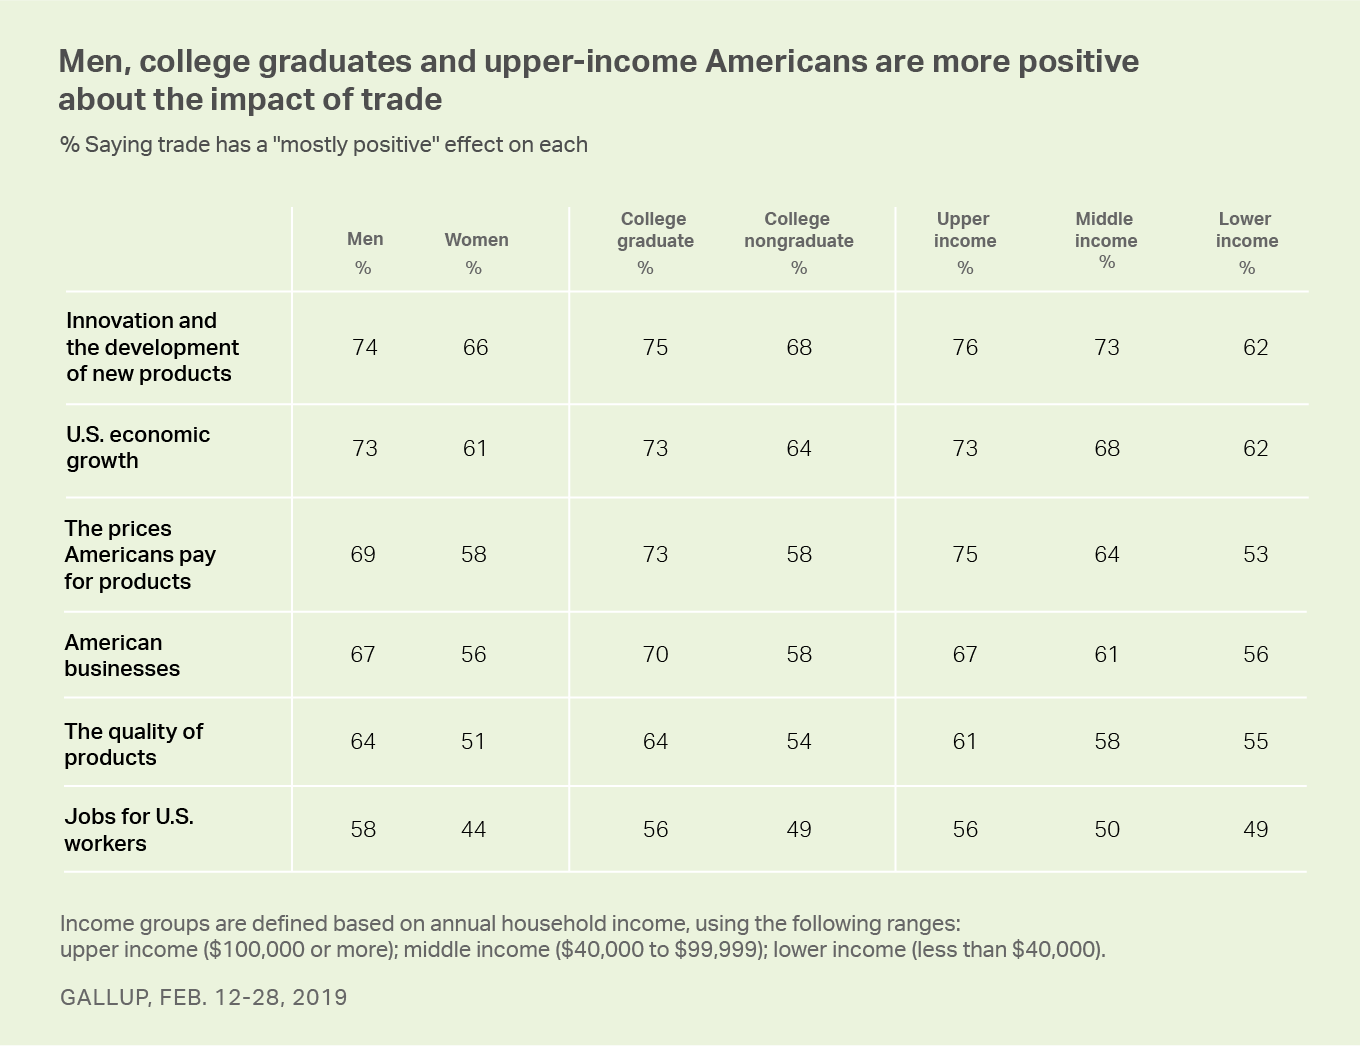 Table. Men, college graduates and upper-income adults are especially positive about the effects of trade.